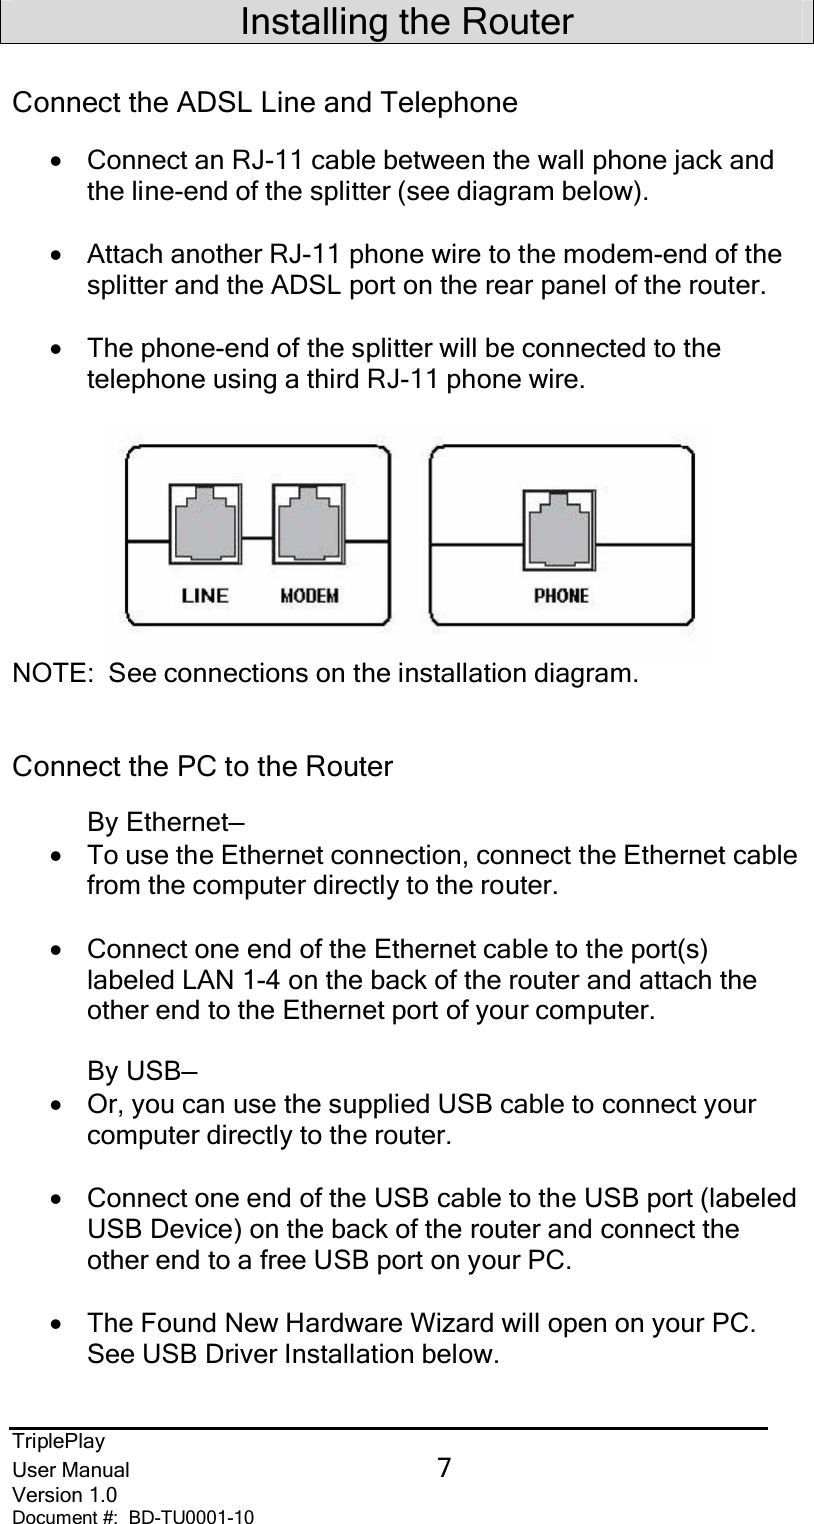 TriplePlayUser Manual 7Version 1.0Document #:  BD-TU0001-10Installing the RouterConnect the ADSL Line and Telephone•Connect an RJ-11 cable between the wall phone jack andthe line-end of the splitter (see diagram below).•Attach another RJ-11 phone wire to the modem-end of thesplitter and the ADSL port on the rear panel of the router.•The phone-end of the splitter will be connected to thetelephone using a third RJ-11 phone wire.NOTE:  See connections on the installation diagram.Connect the PC to the RouterBy Ethernet—•To use the Ethernet connection, connect the Ethernet cablefrom the computer directly to the router.•Connect one end of the Ethernet cable to the port(s)labeled LAN 1-4 on the back of the router and attach theother end to the Ethernet port of your computer.By USB—•Or, you can use the supplied USB cable to connect yourcomputer directly to the router.•Connect one end of the USB cable to the USB port (labeledUSB Device) on the back of the router and connect theother end to a free USB port on your PC.•The Found New Hardware Wizard will open on your PC.See USB Driver Installation below.